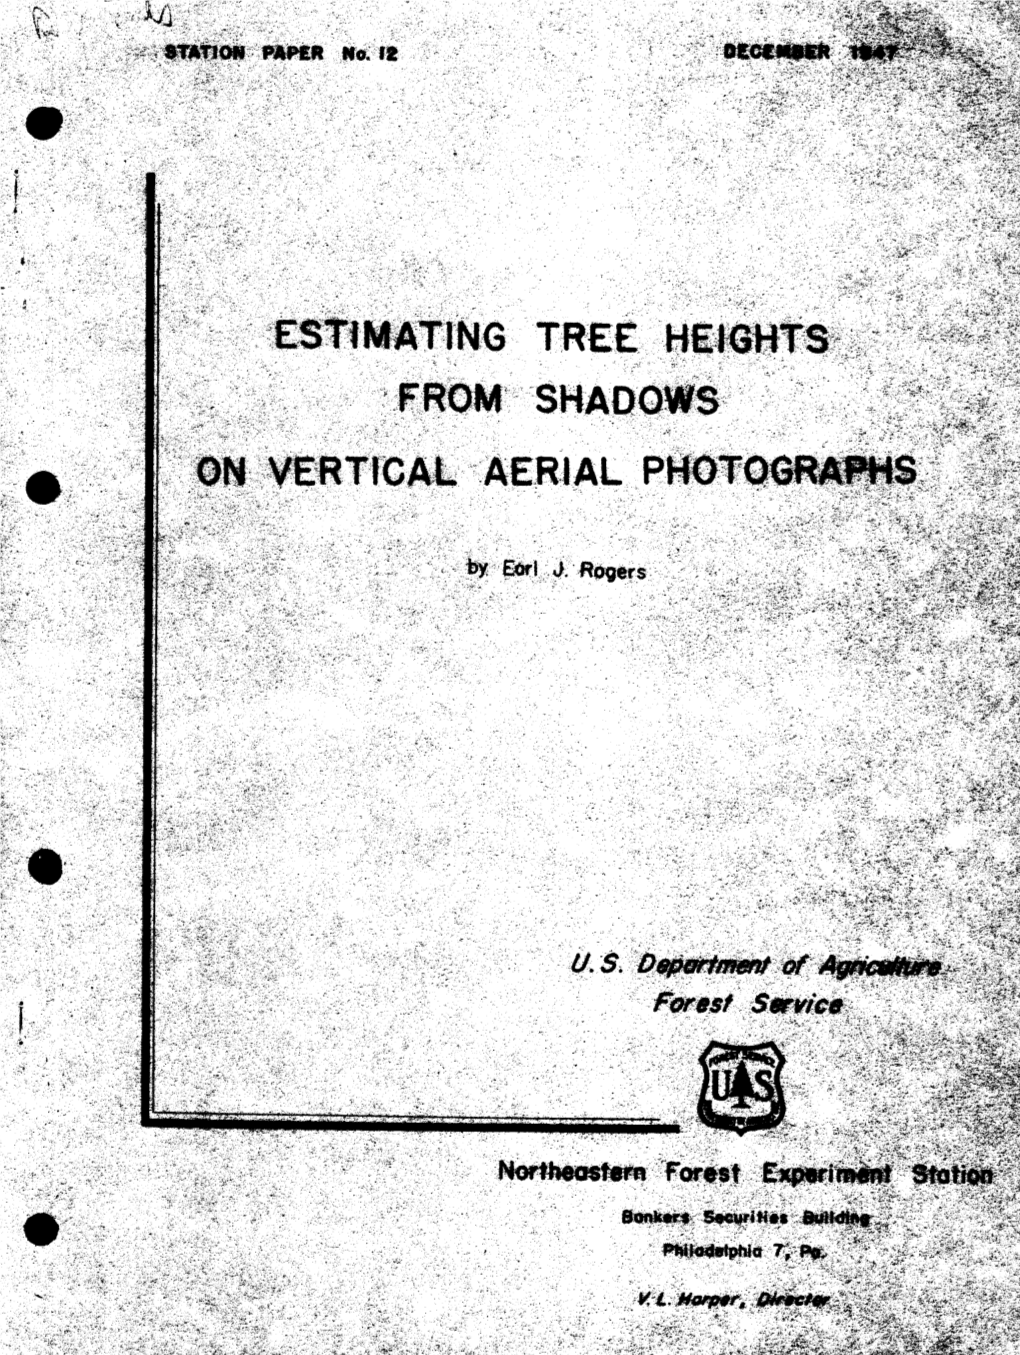 Estimating Tree Heights from Shadows on Vertical Aerial Photographs